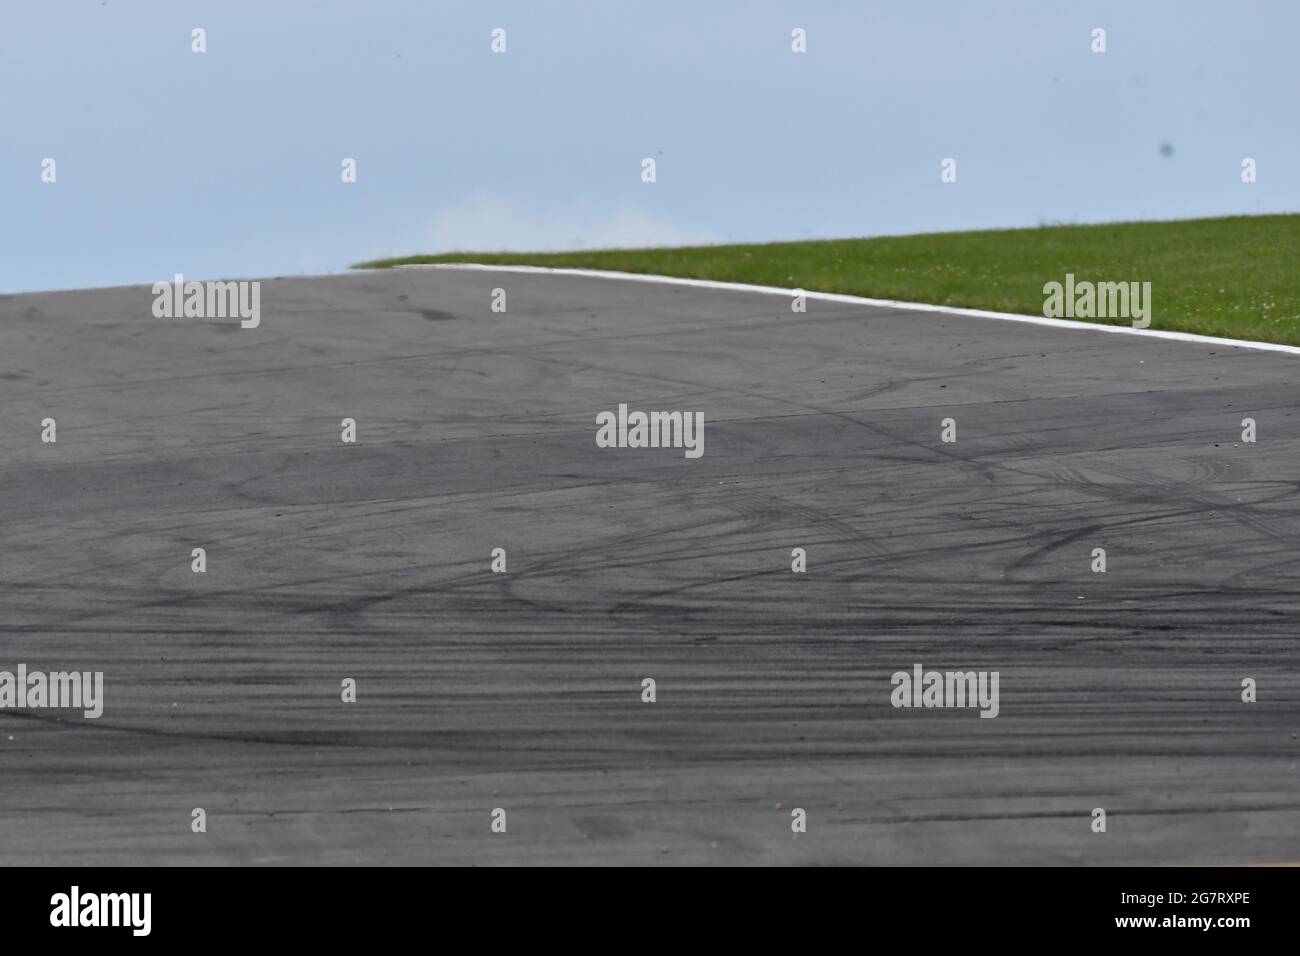 A section of a race track going up a hill showing tyre skid marks Stock Photo